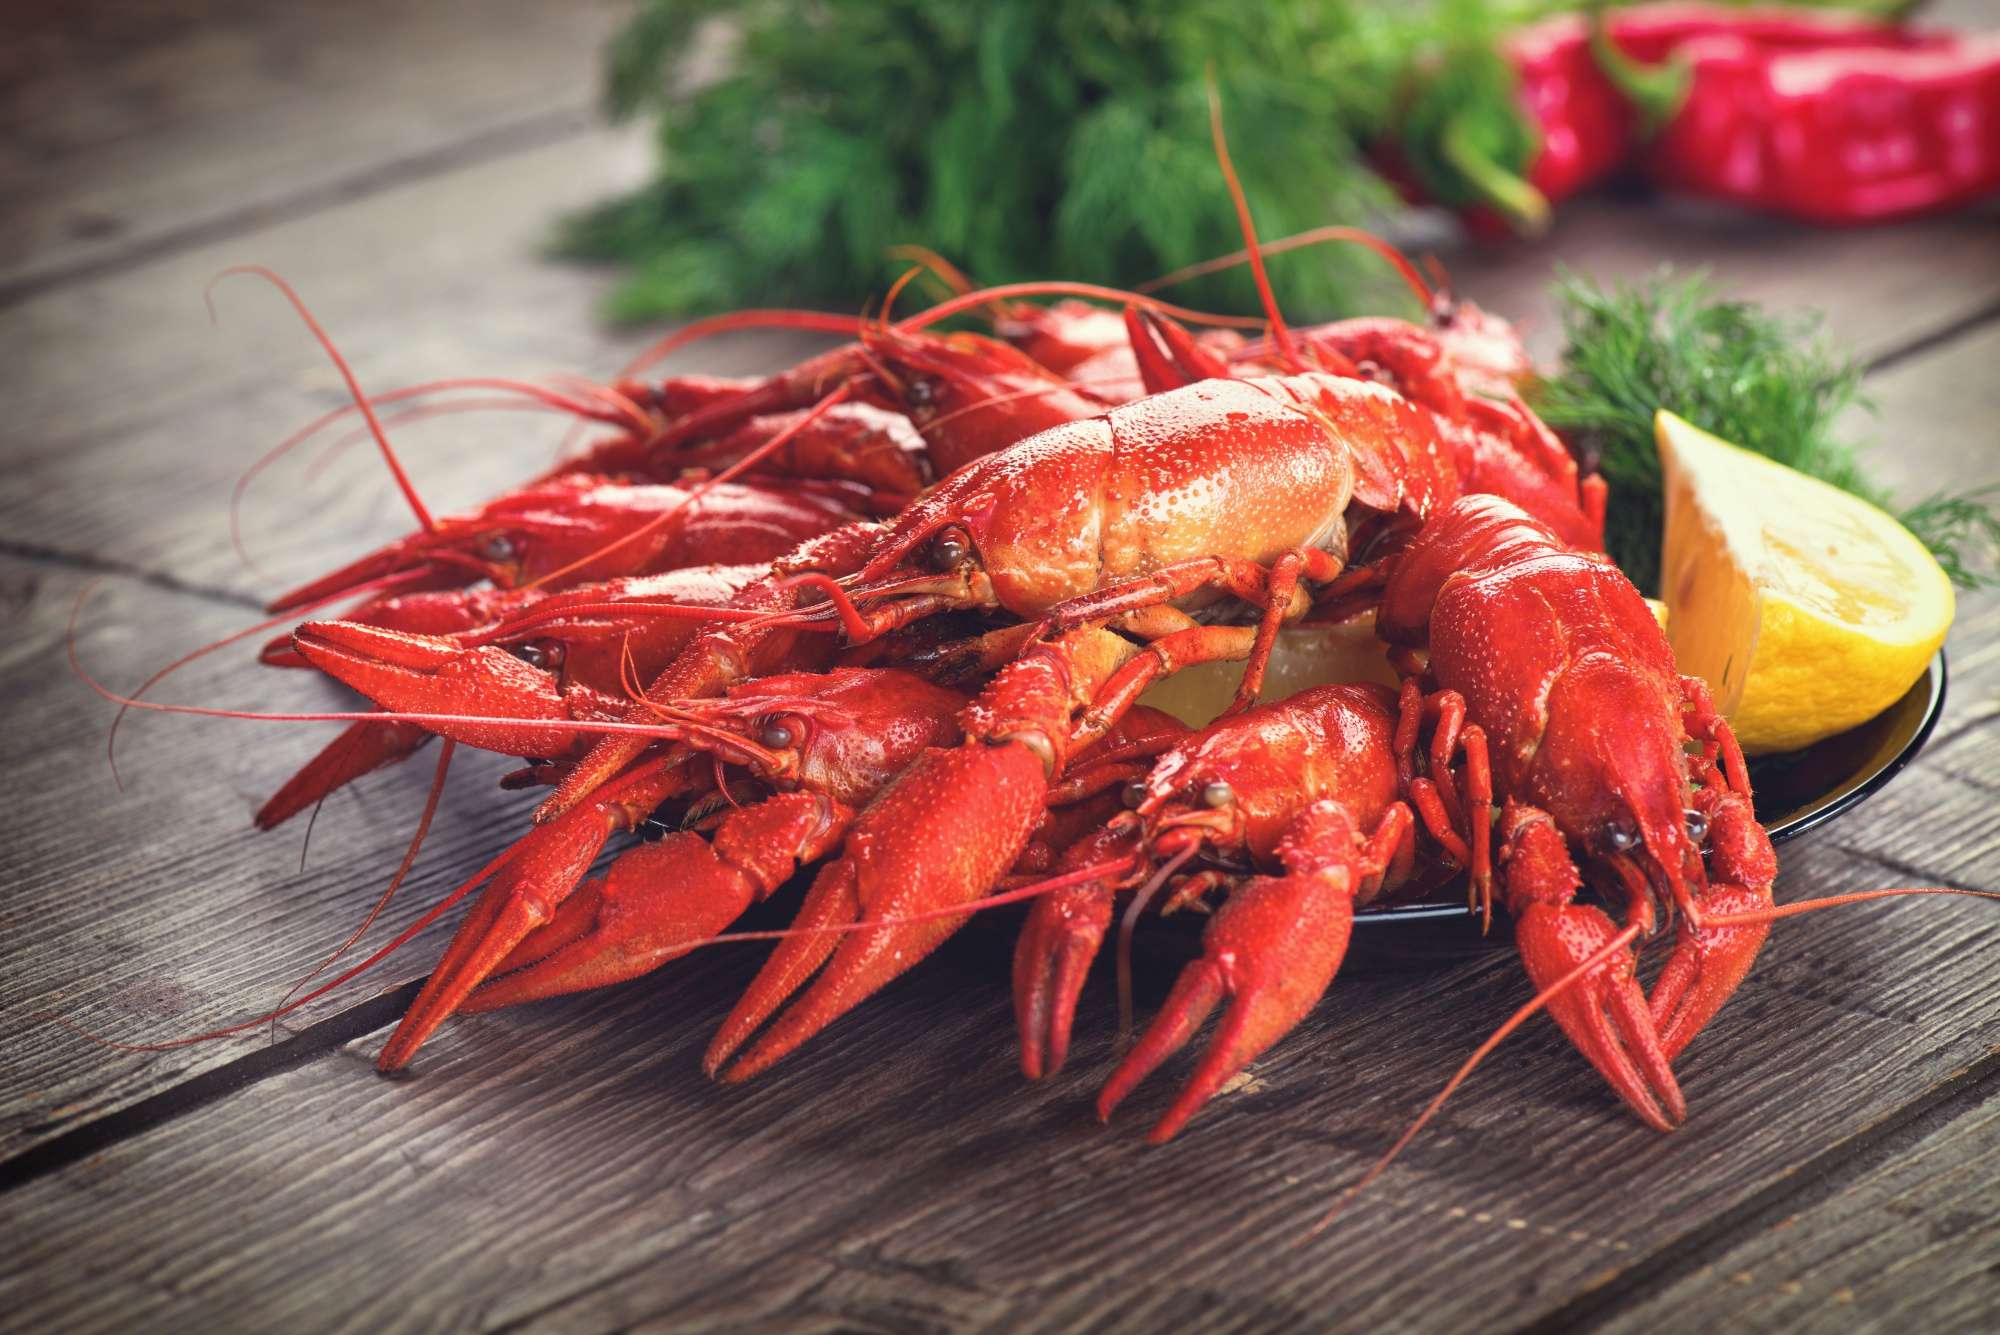 Boiled red crayfish or crawfish with a herbs